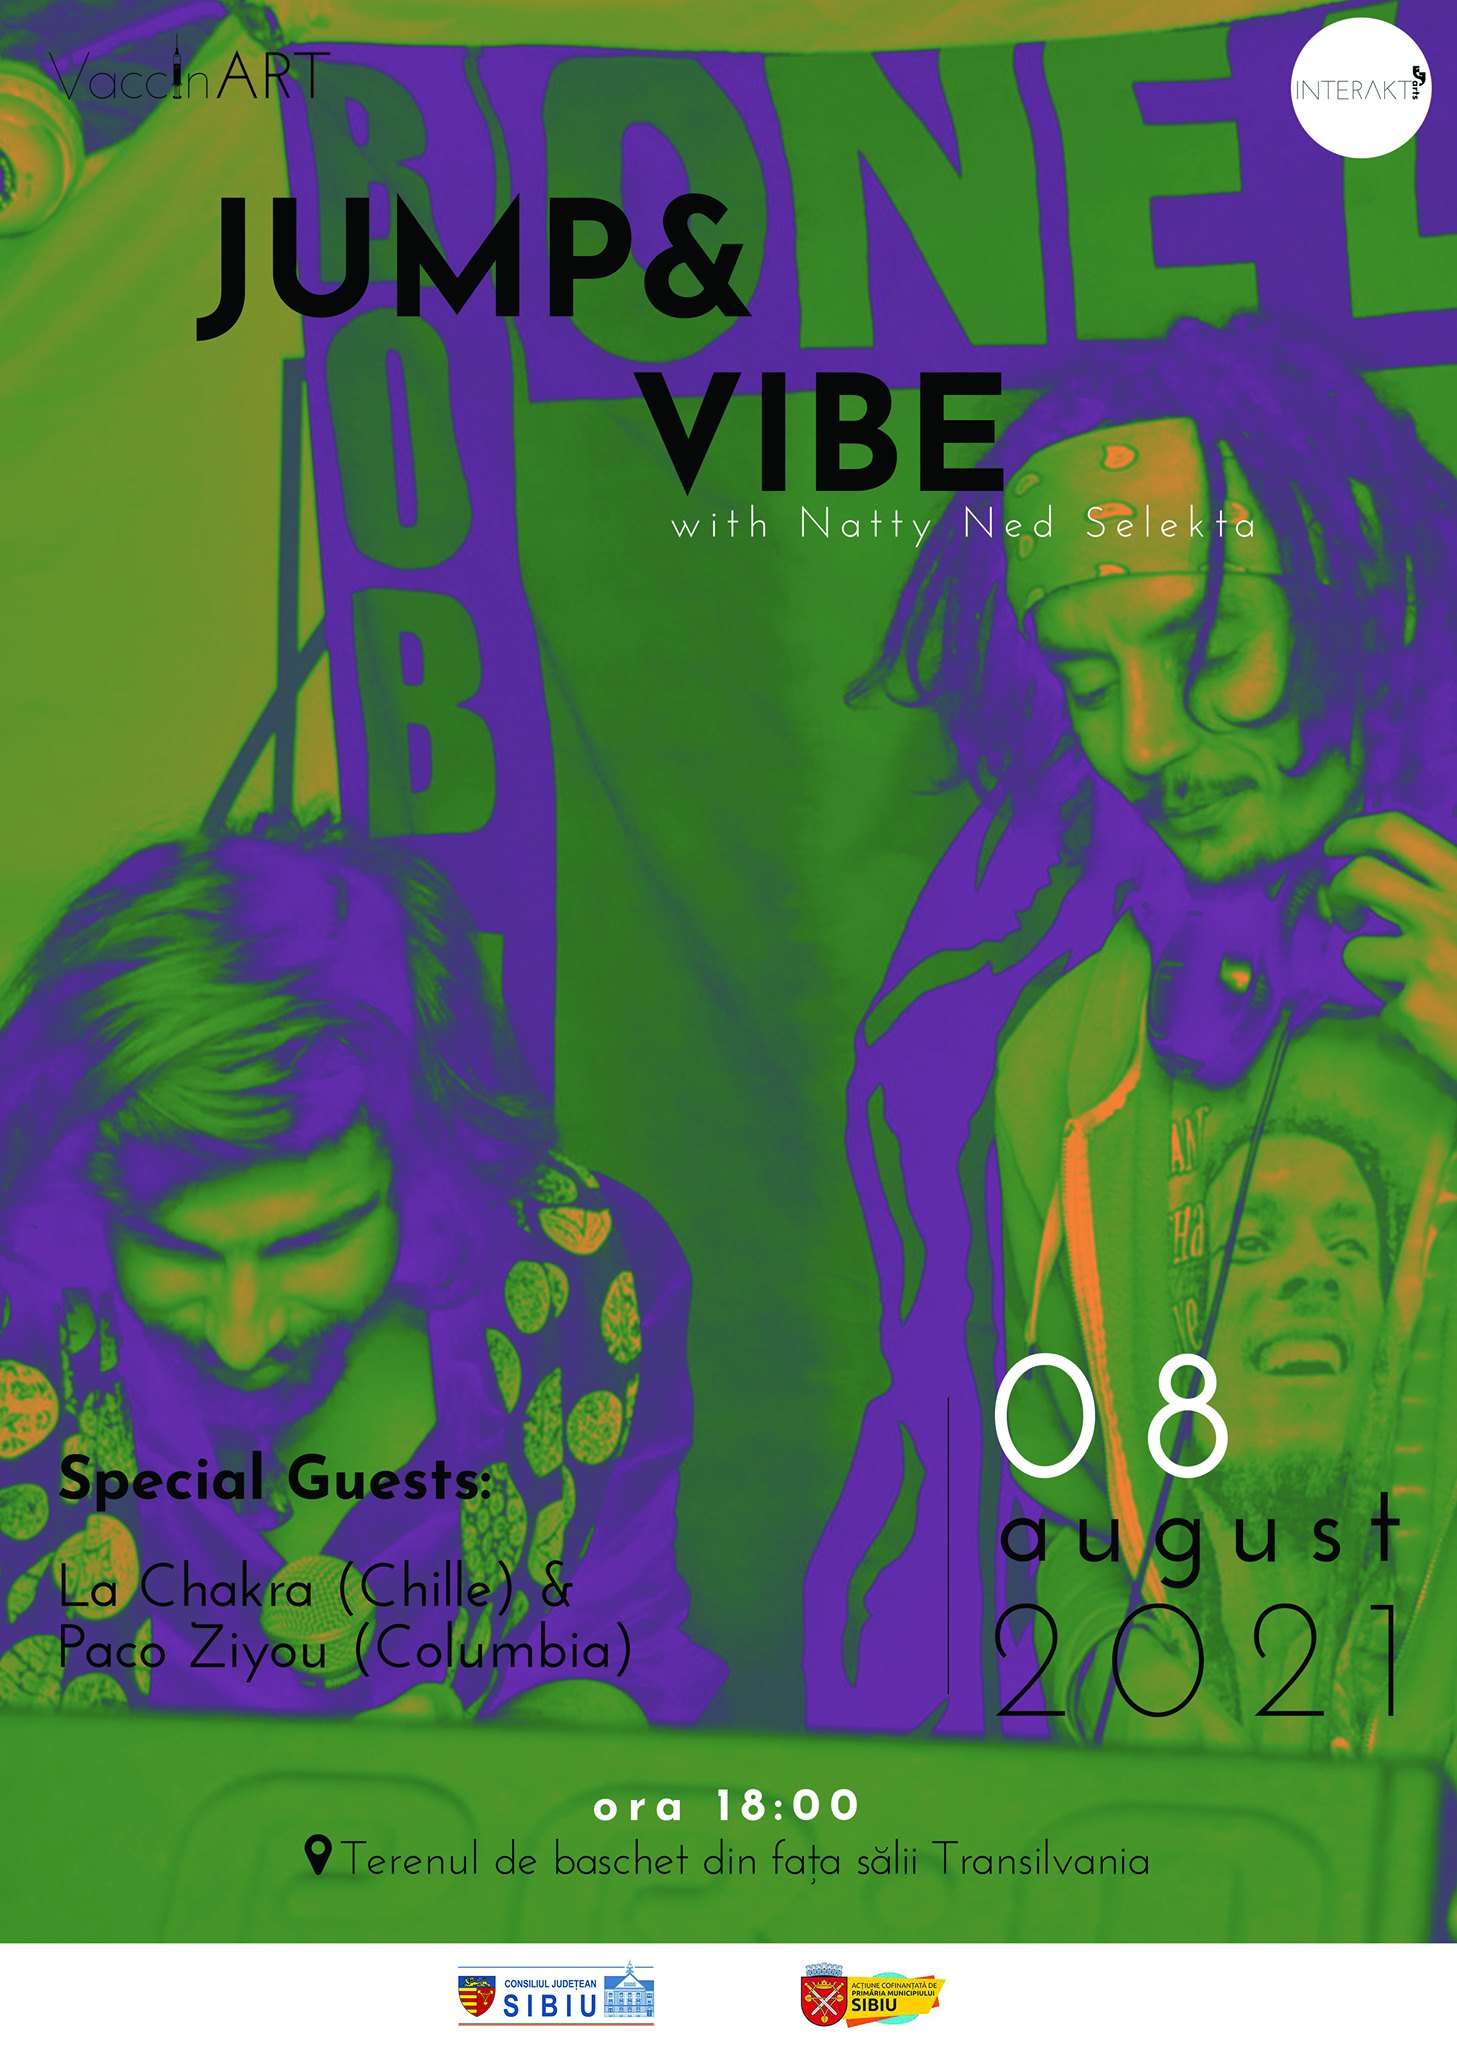 Jump & Vibe with Natty Ned Selekta- Special Guests: La Chakra (Chille) & Paco Ziyou (Columbia)